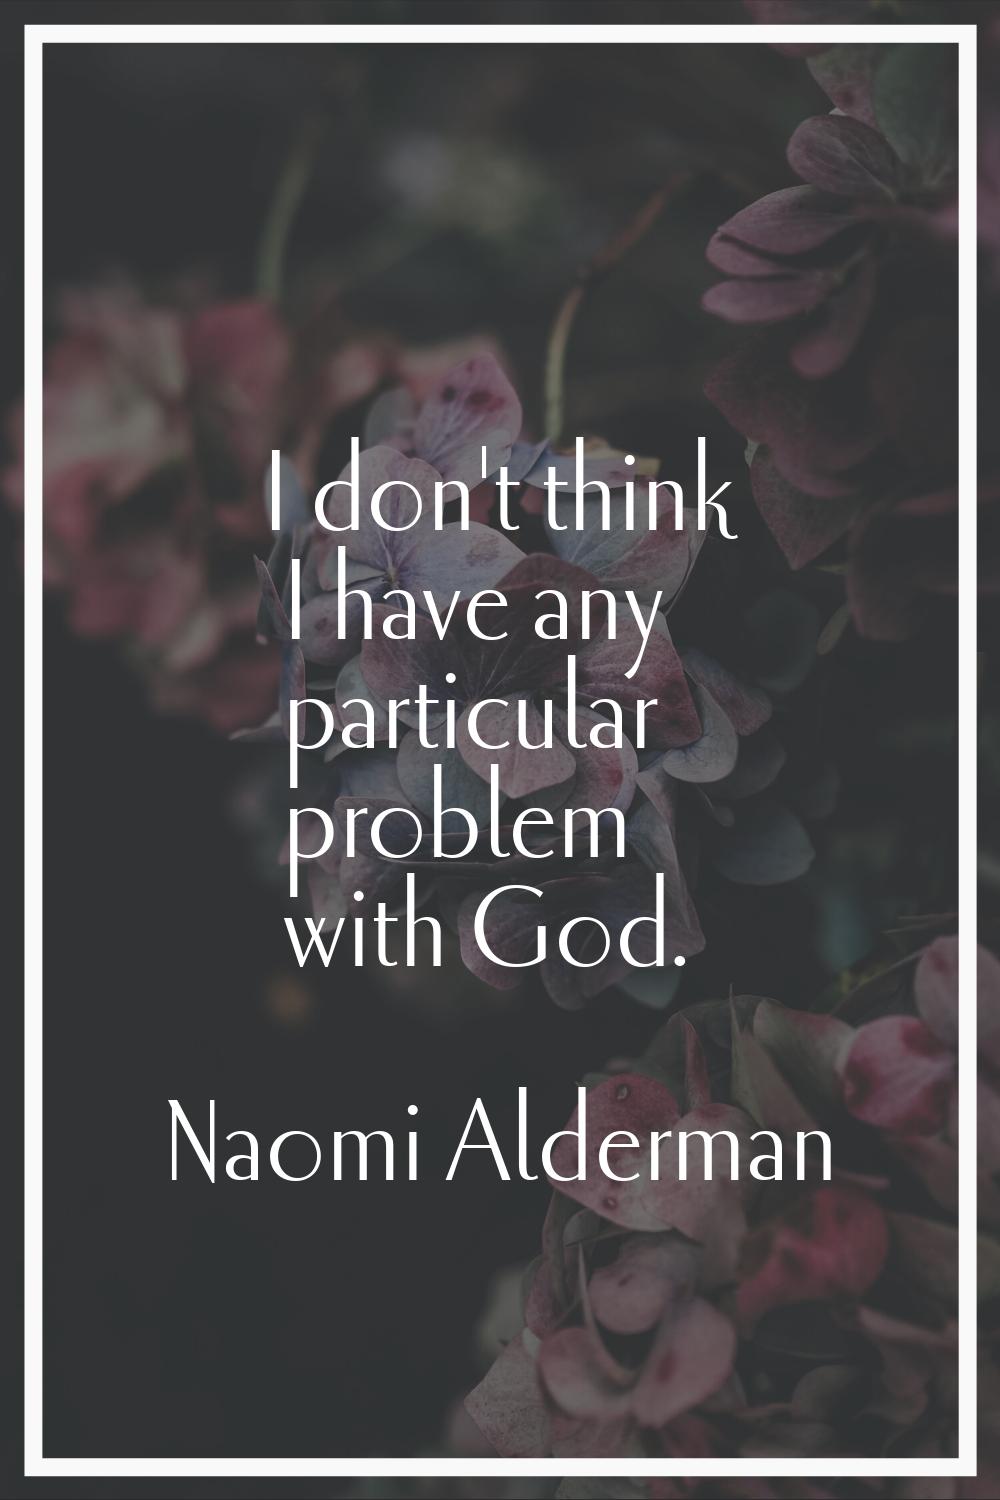 I don't think I have any particular problem with God.